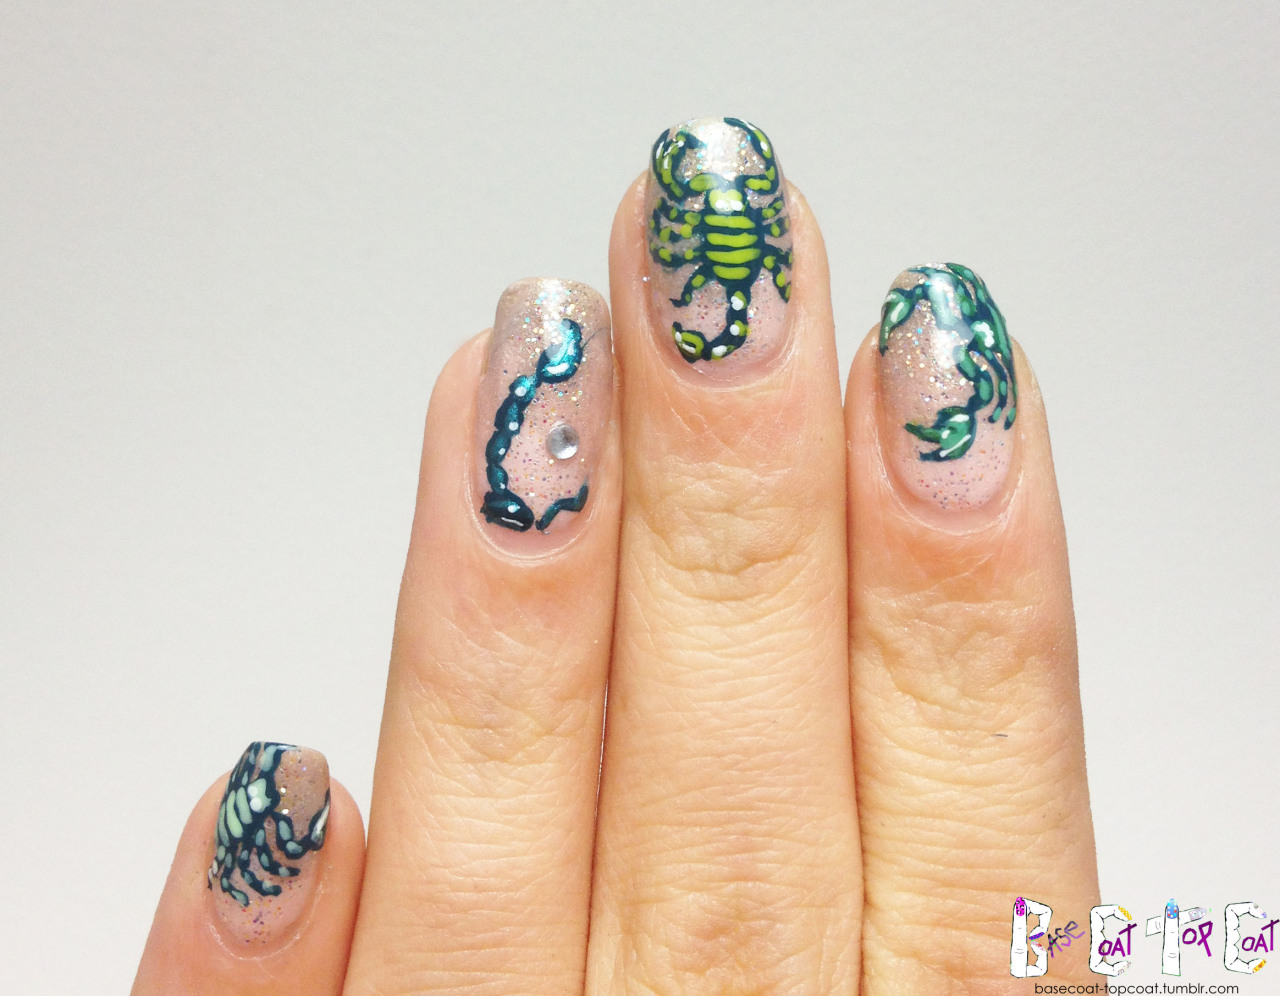 Scorpio Themed Nails - wide 7